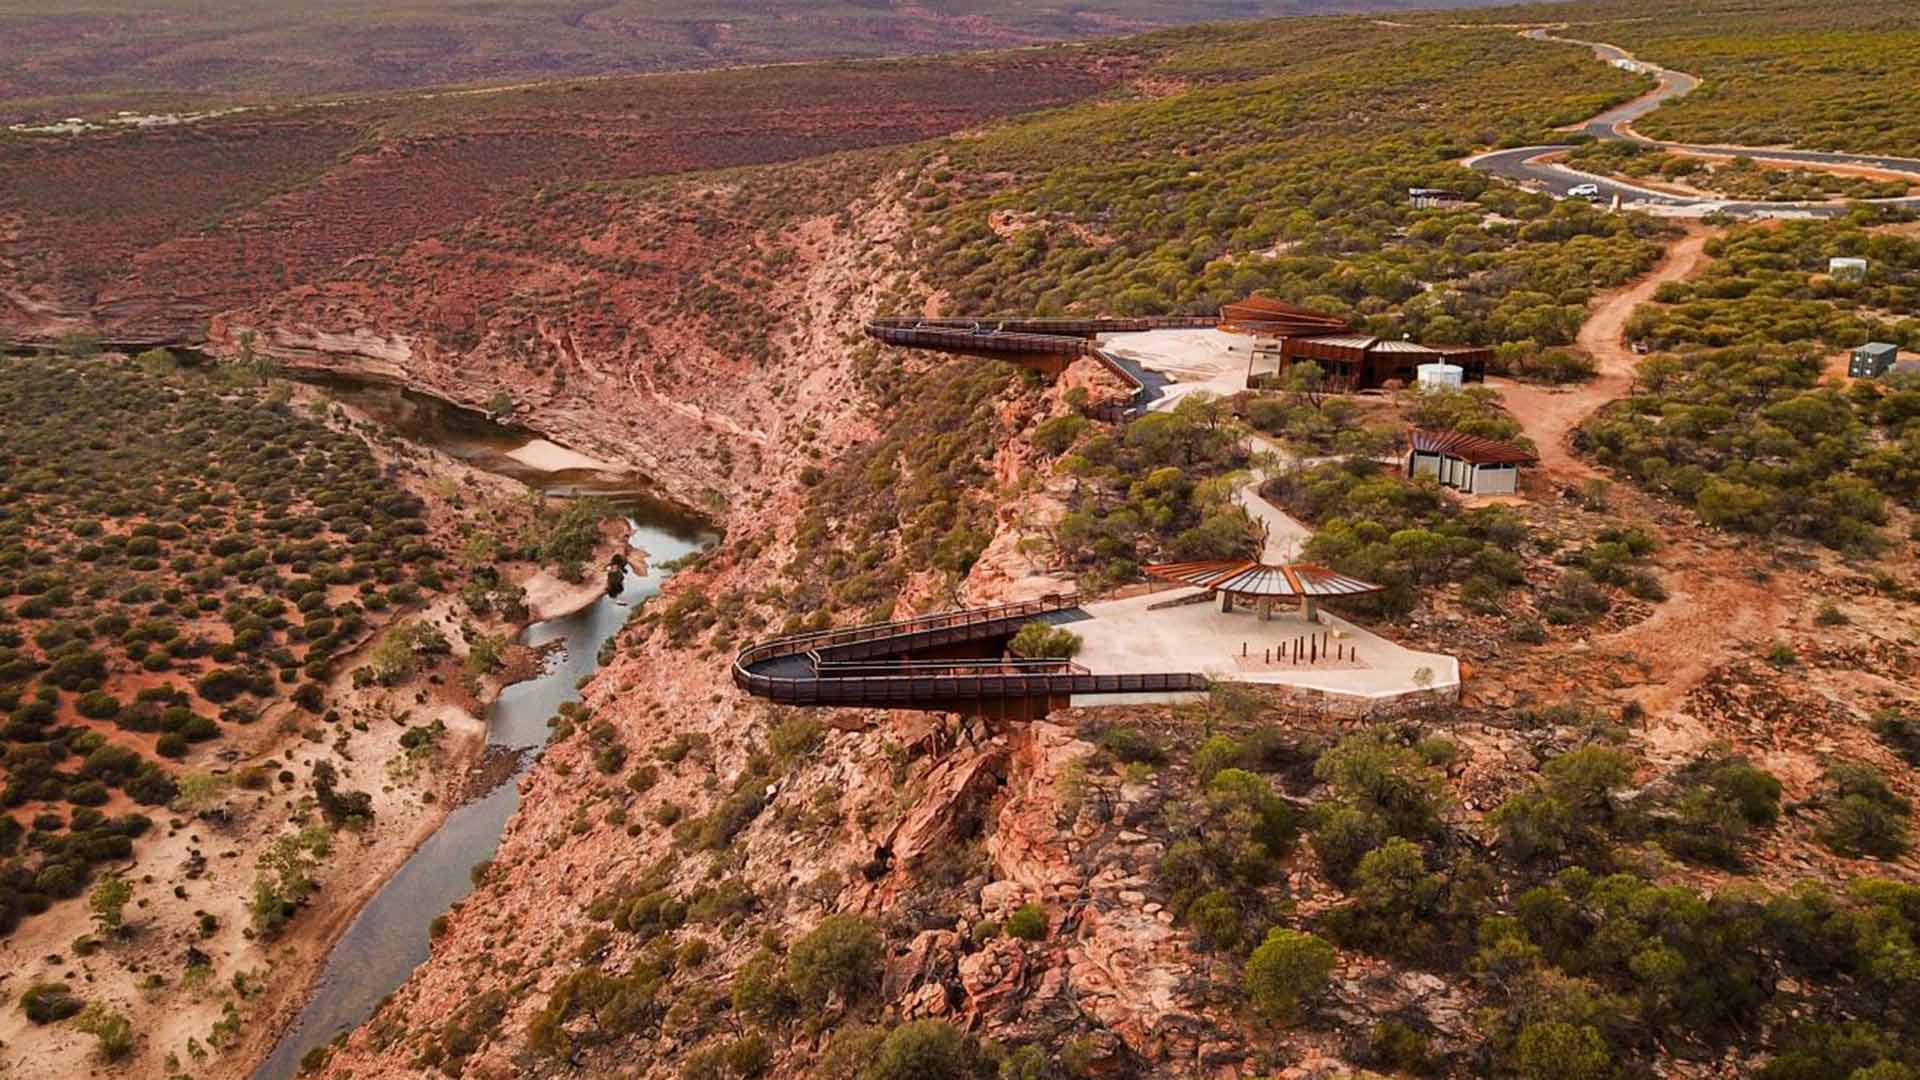 Western Australia's Kalbarri National Park Is Now Home to a 100-Metre-High Skywalk Over a Gorge